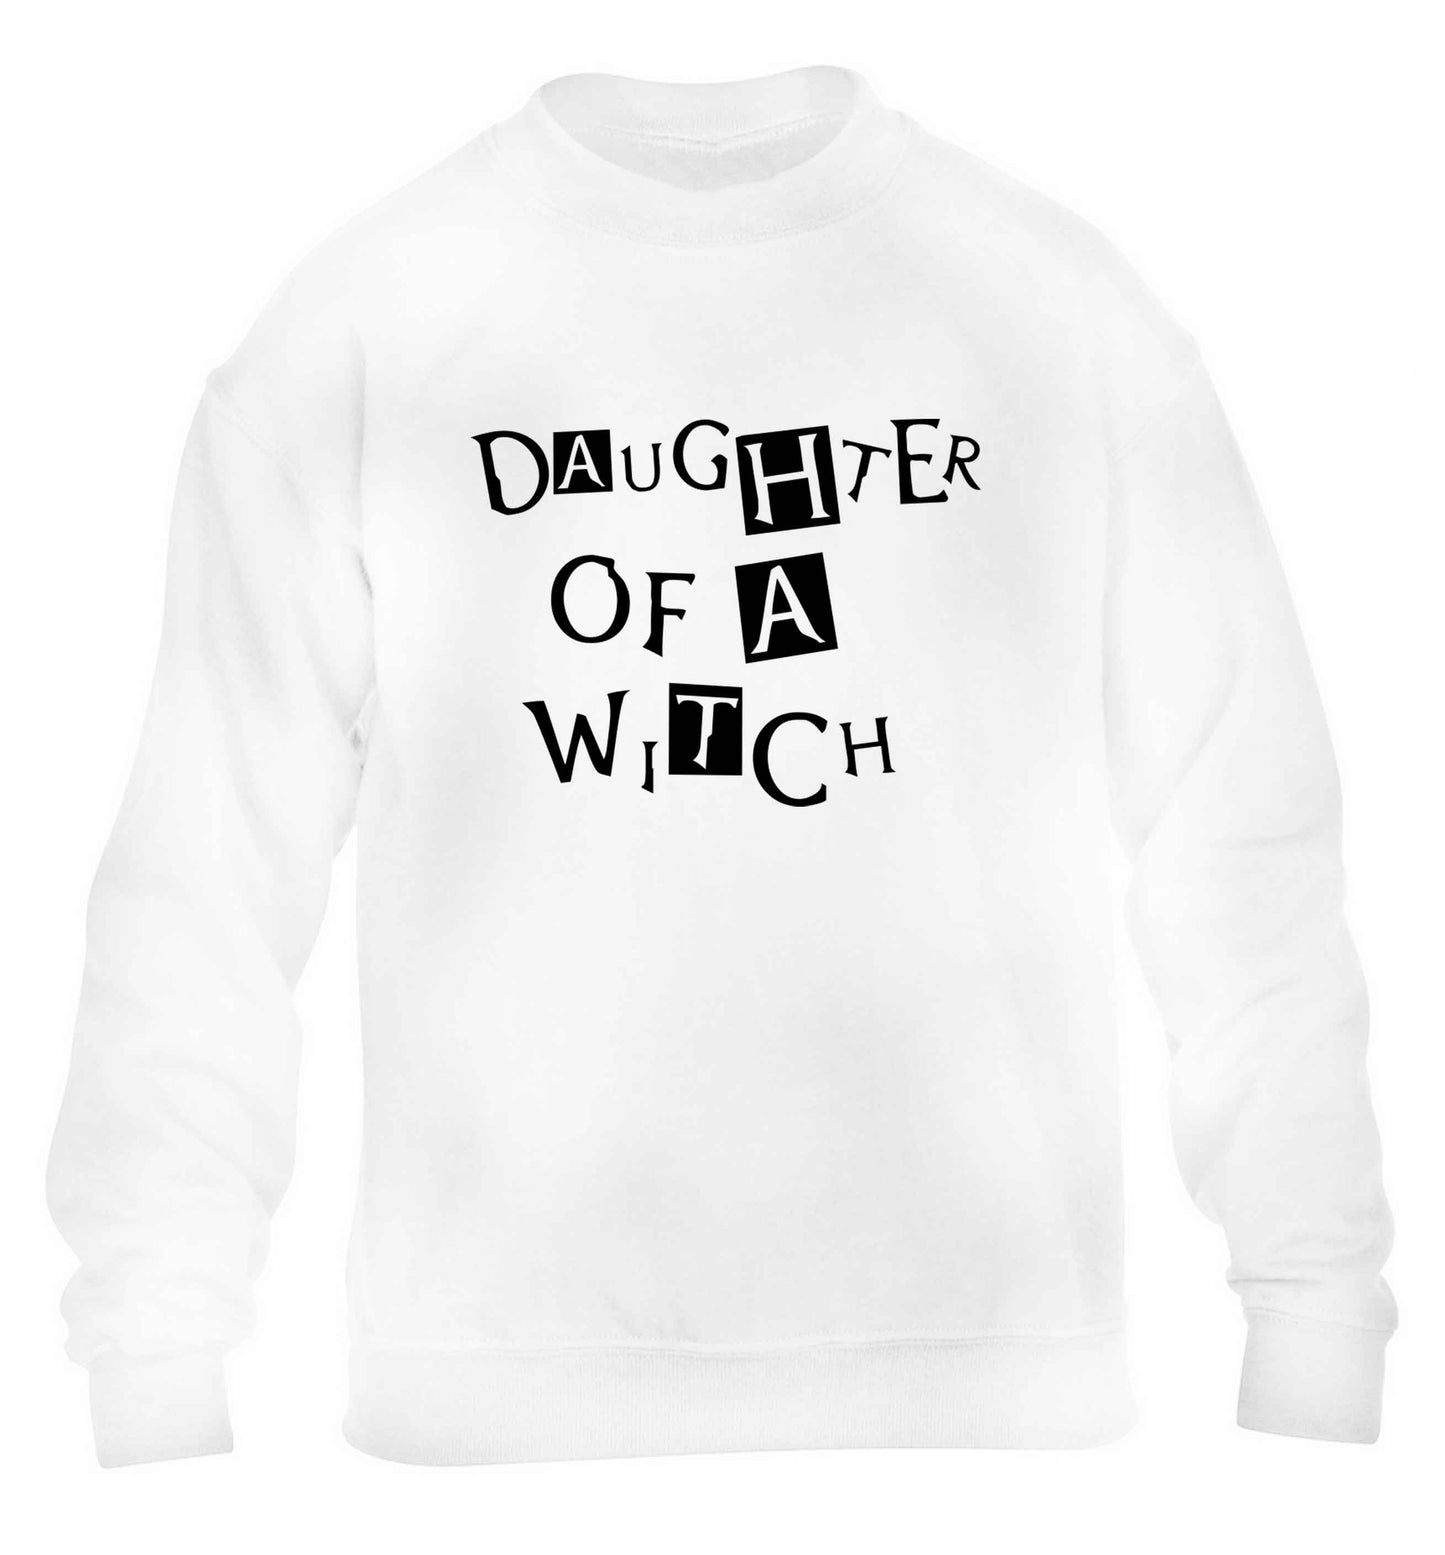 Daughter of a witch children's white sweater 12-13 Years